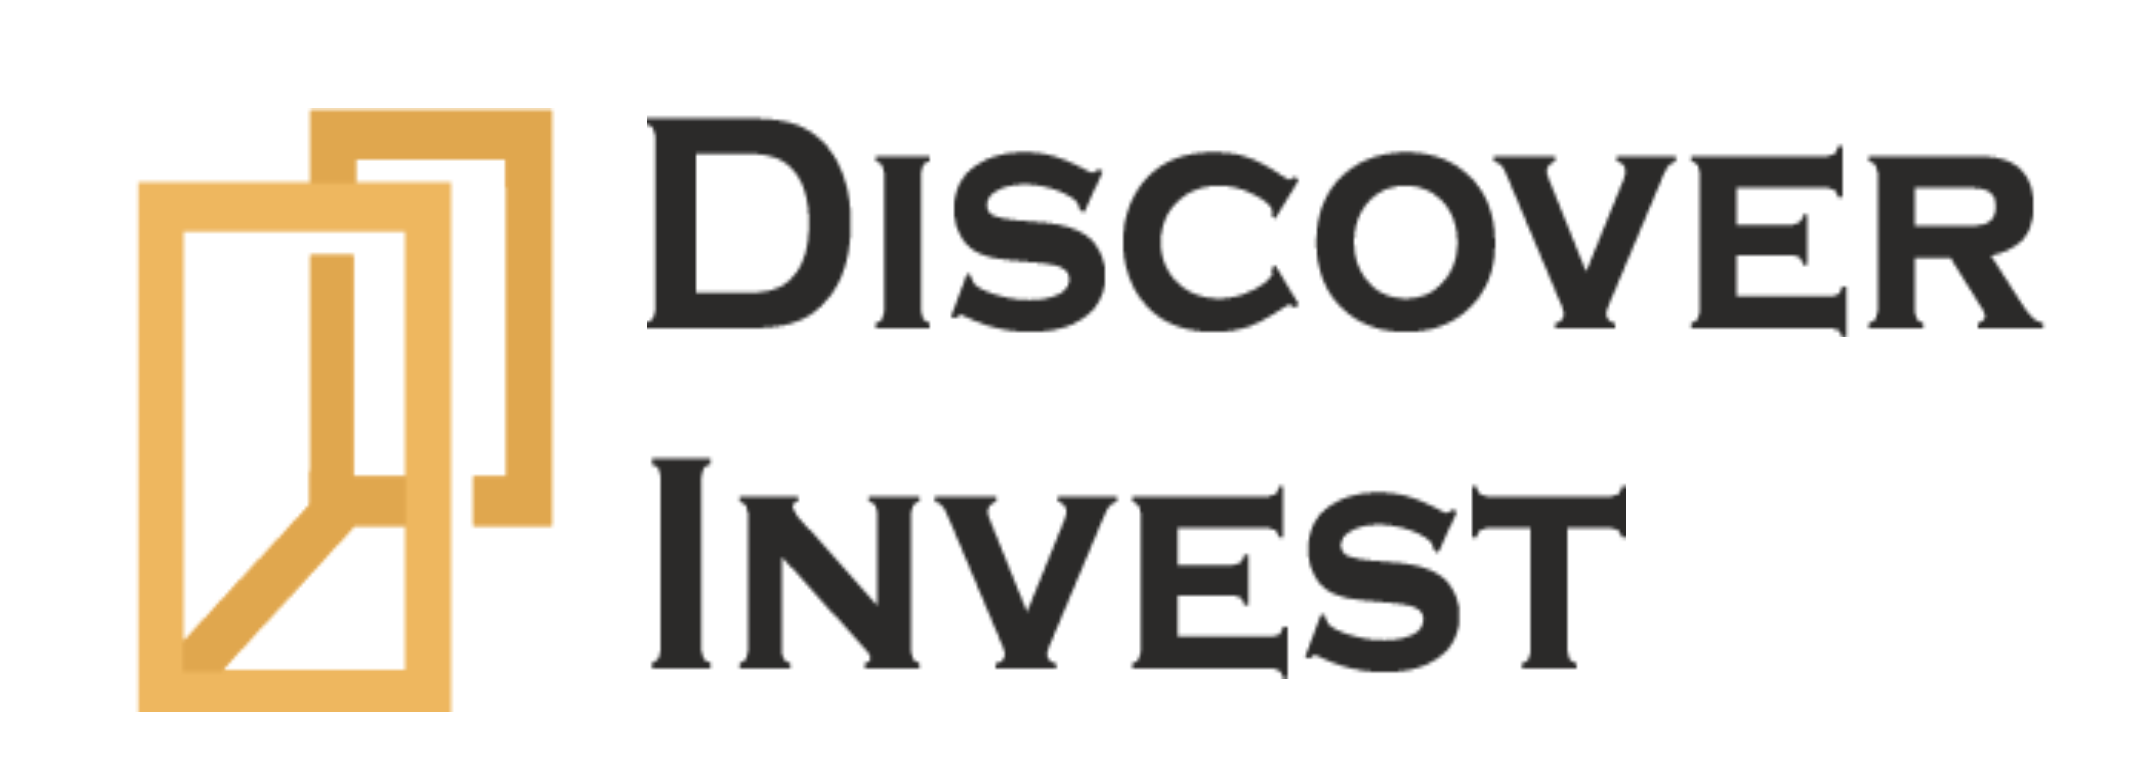 Discover Invest